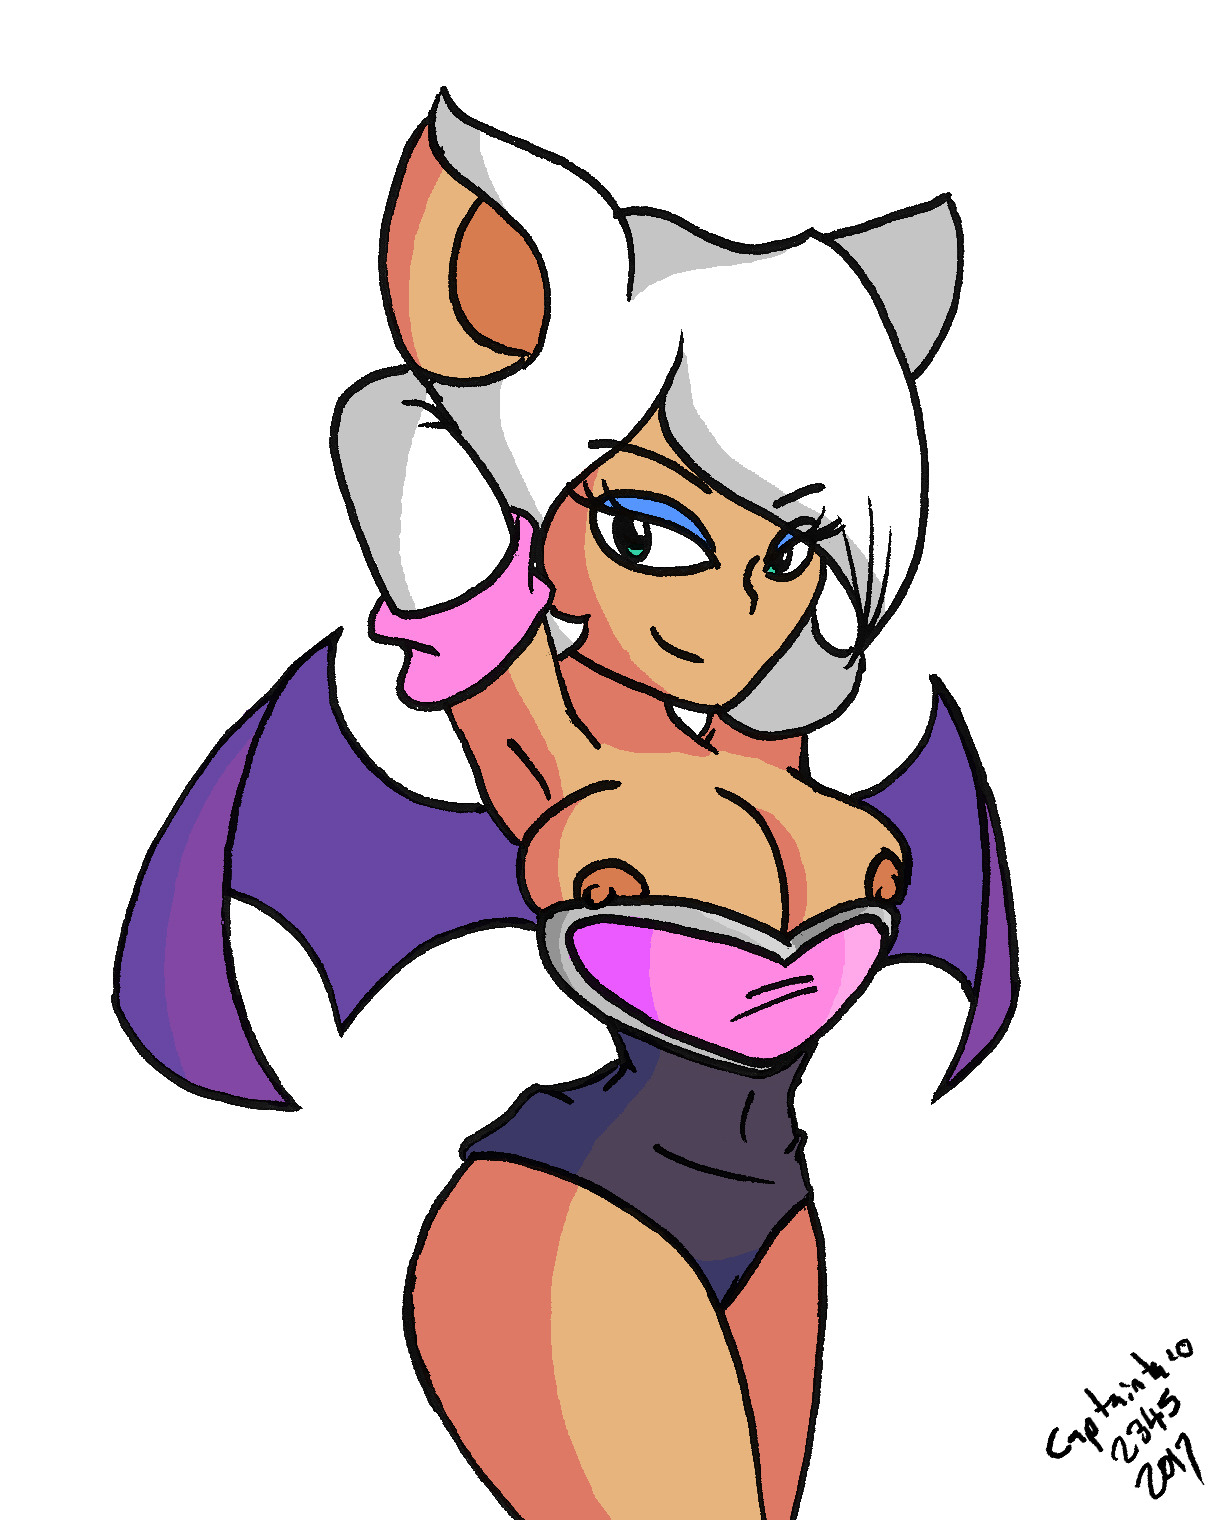 Humanized Rouge the Bat from Sonic the Hedgehog. I was a bit of a furry when I was